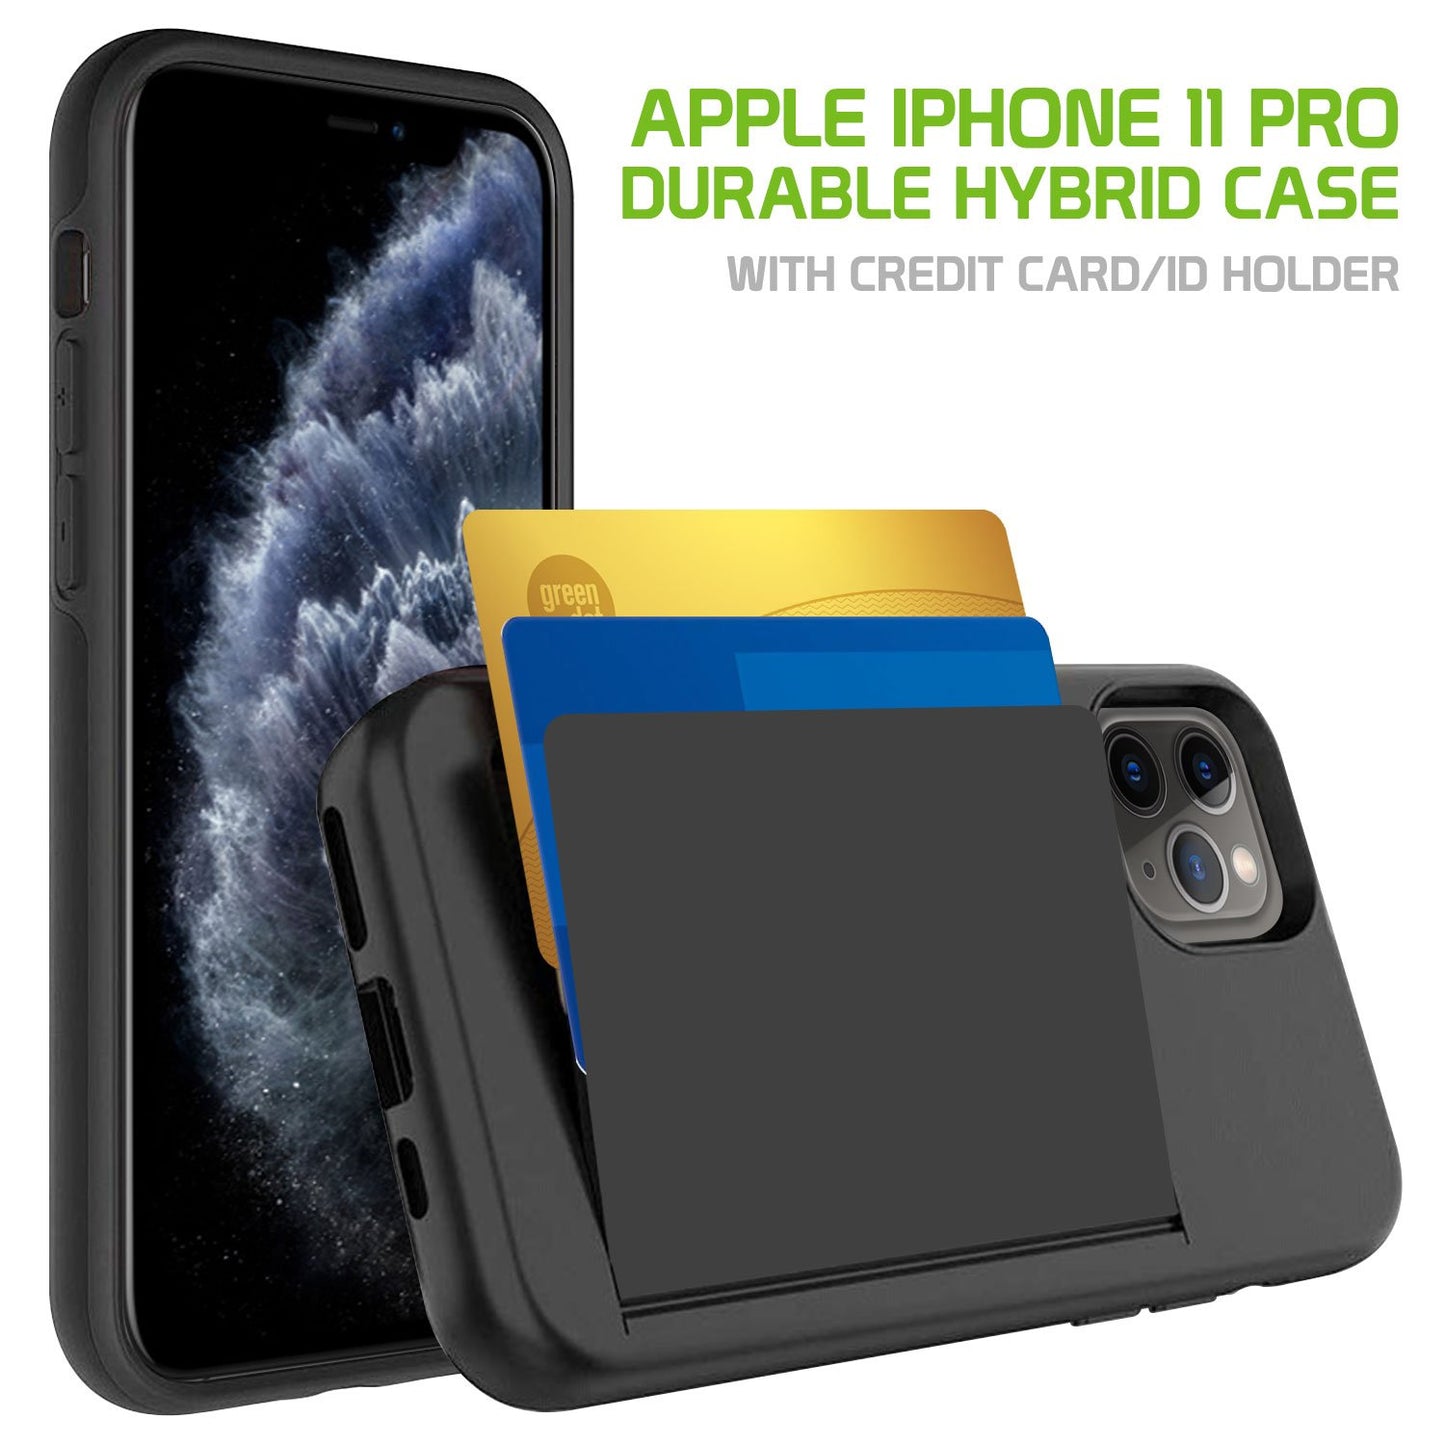 CCIPH11PBK - Durable Slim Protective Wallet Case - ID & Credit Card Holder Slot - iPhone 11 Pro